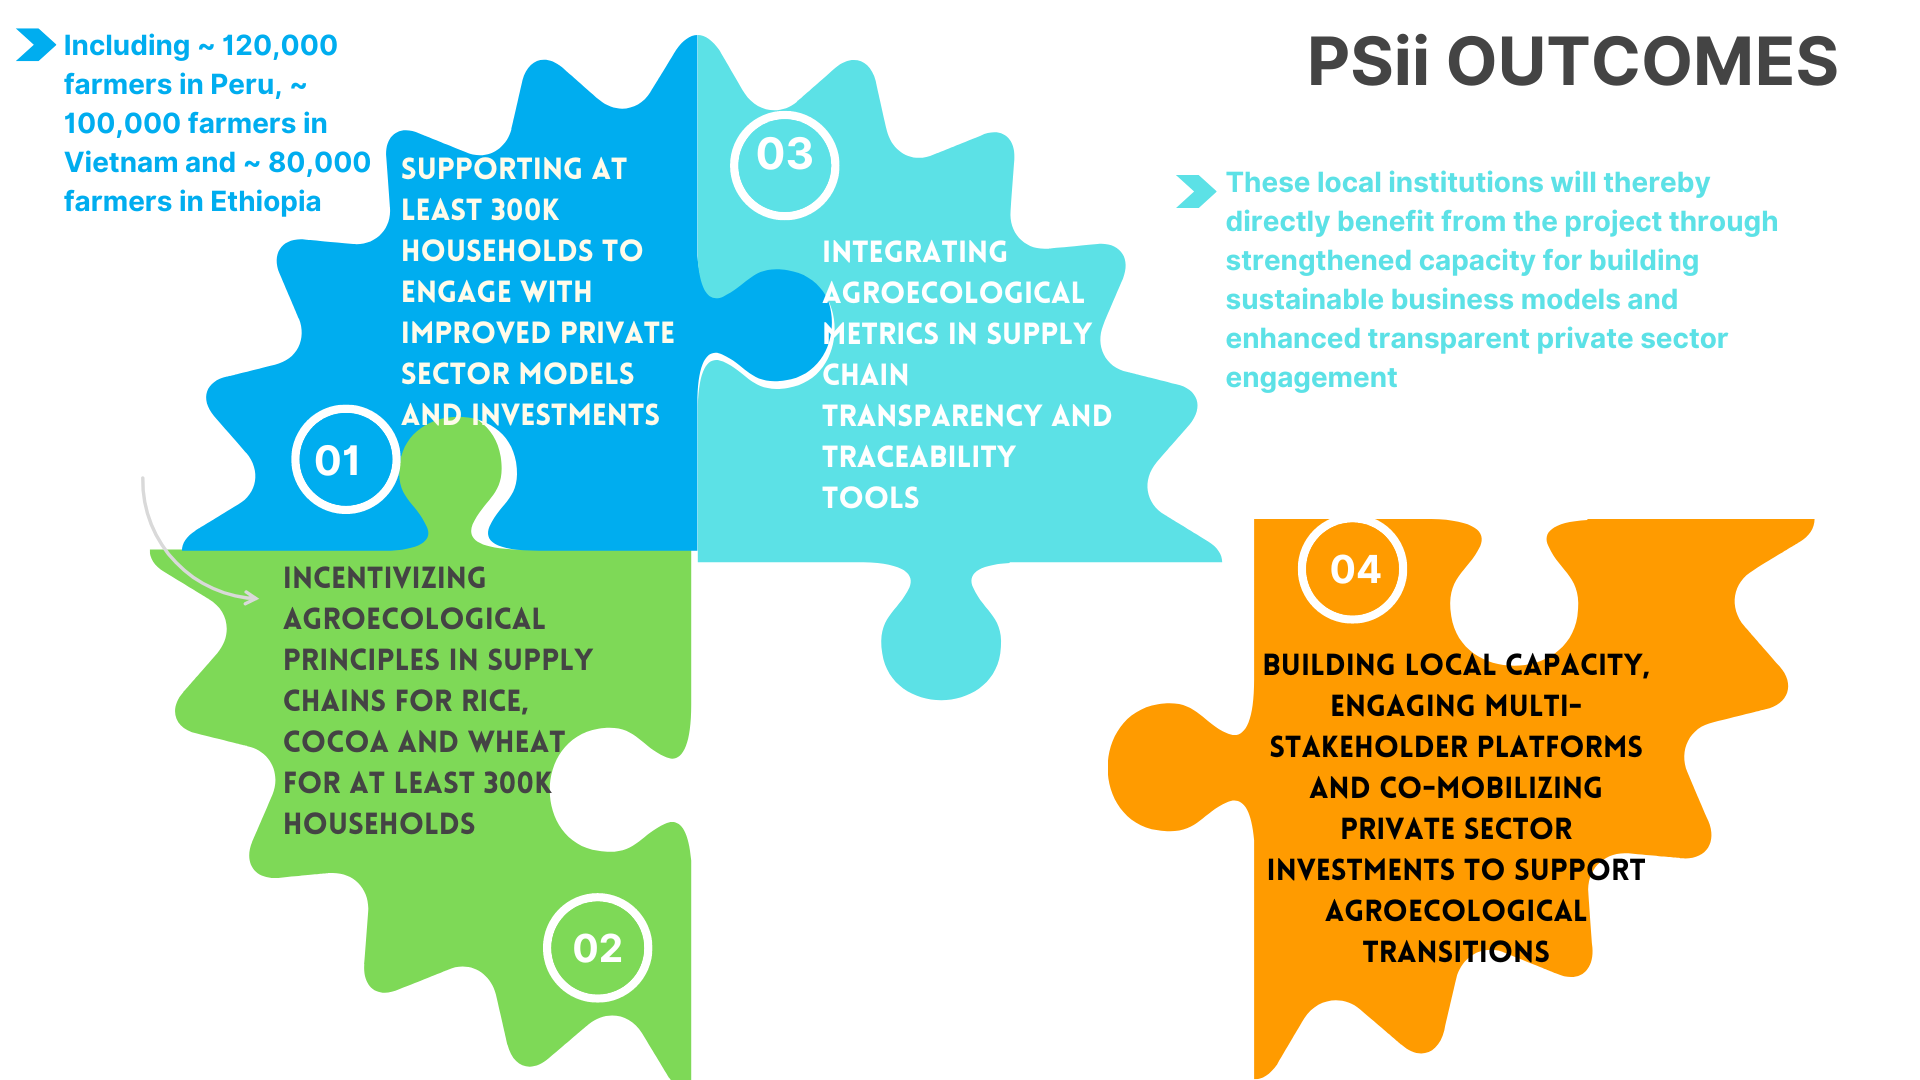 Expected outcomes from the Psii project